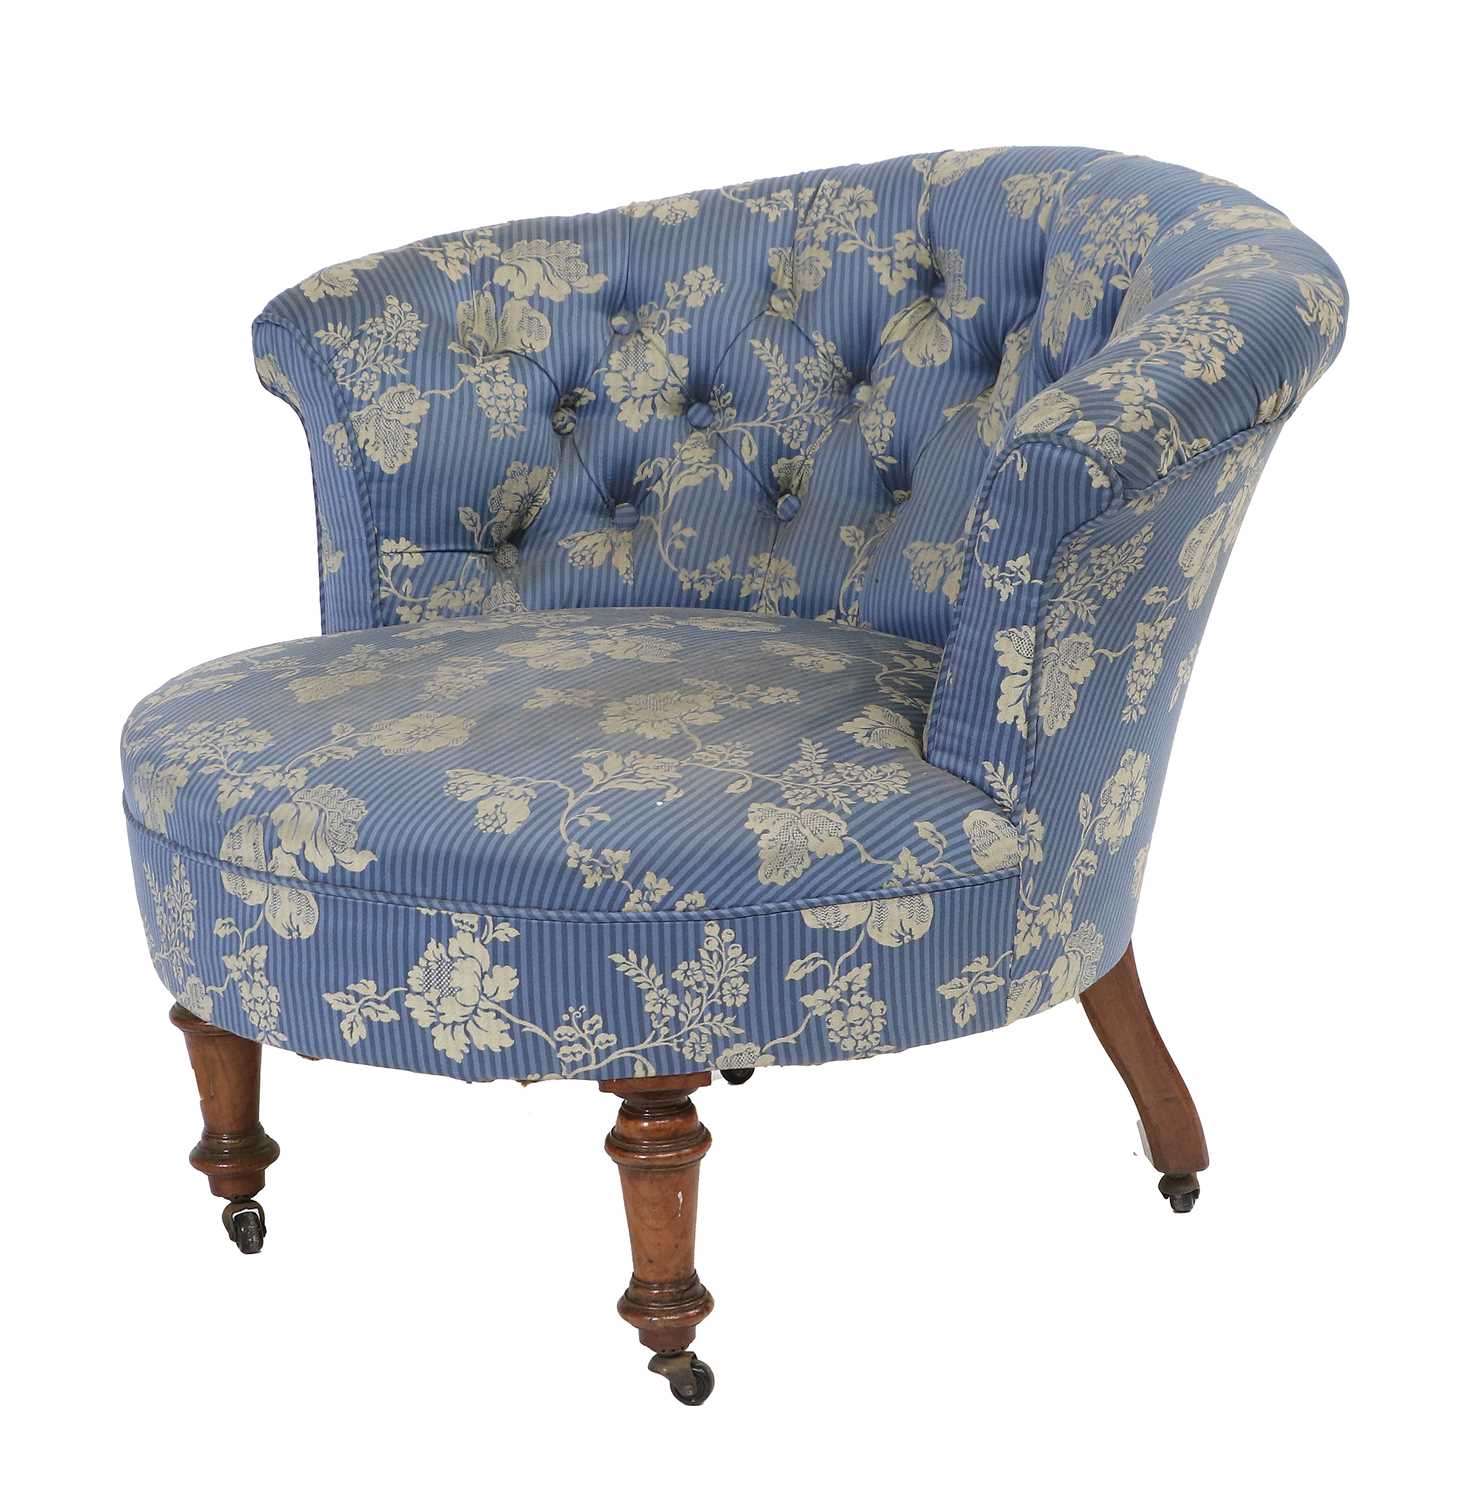 A Victorian Walnut Tub-Shape Nursing Chair, circa 1870, recovered in blue and gold floral buttoned